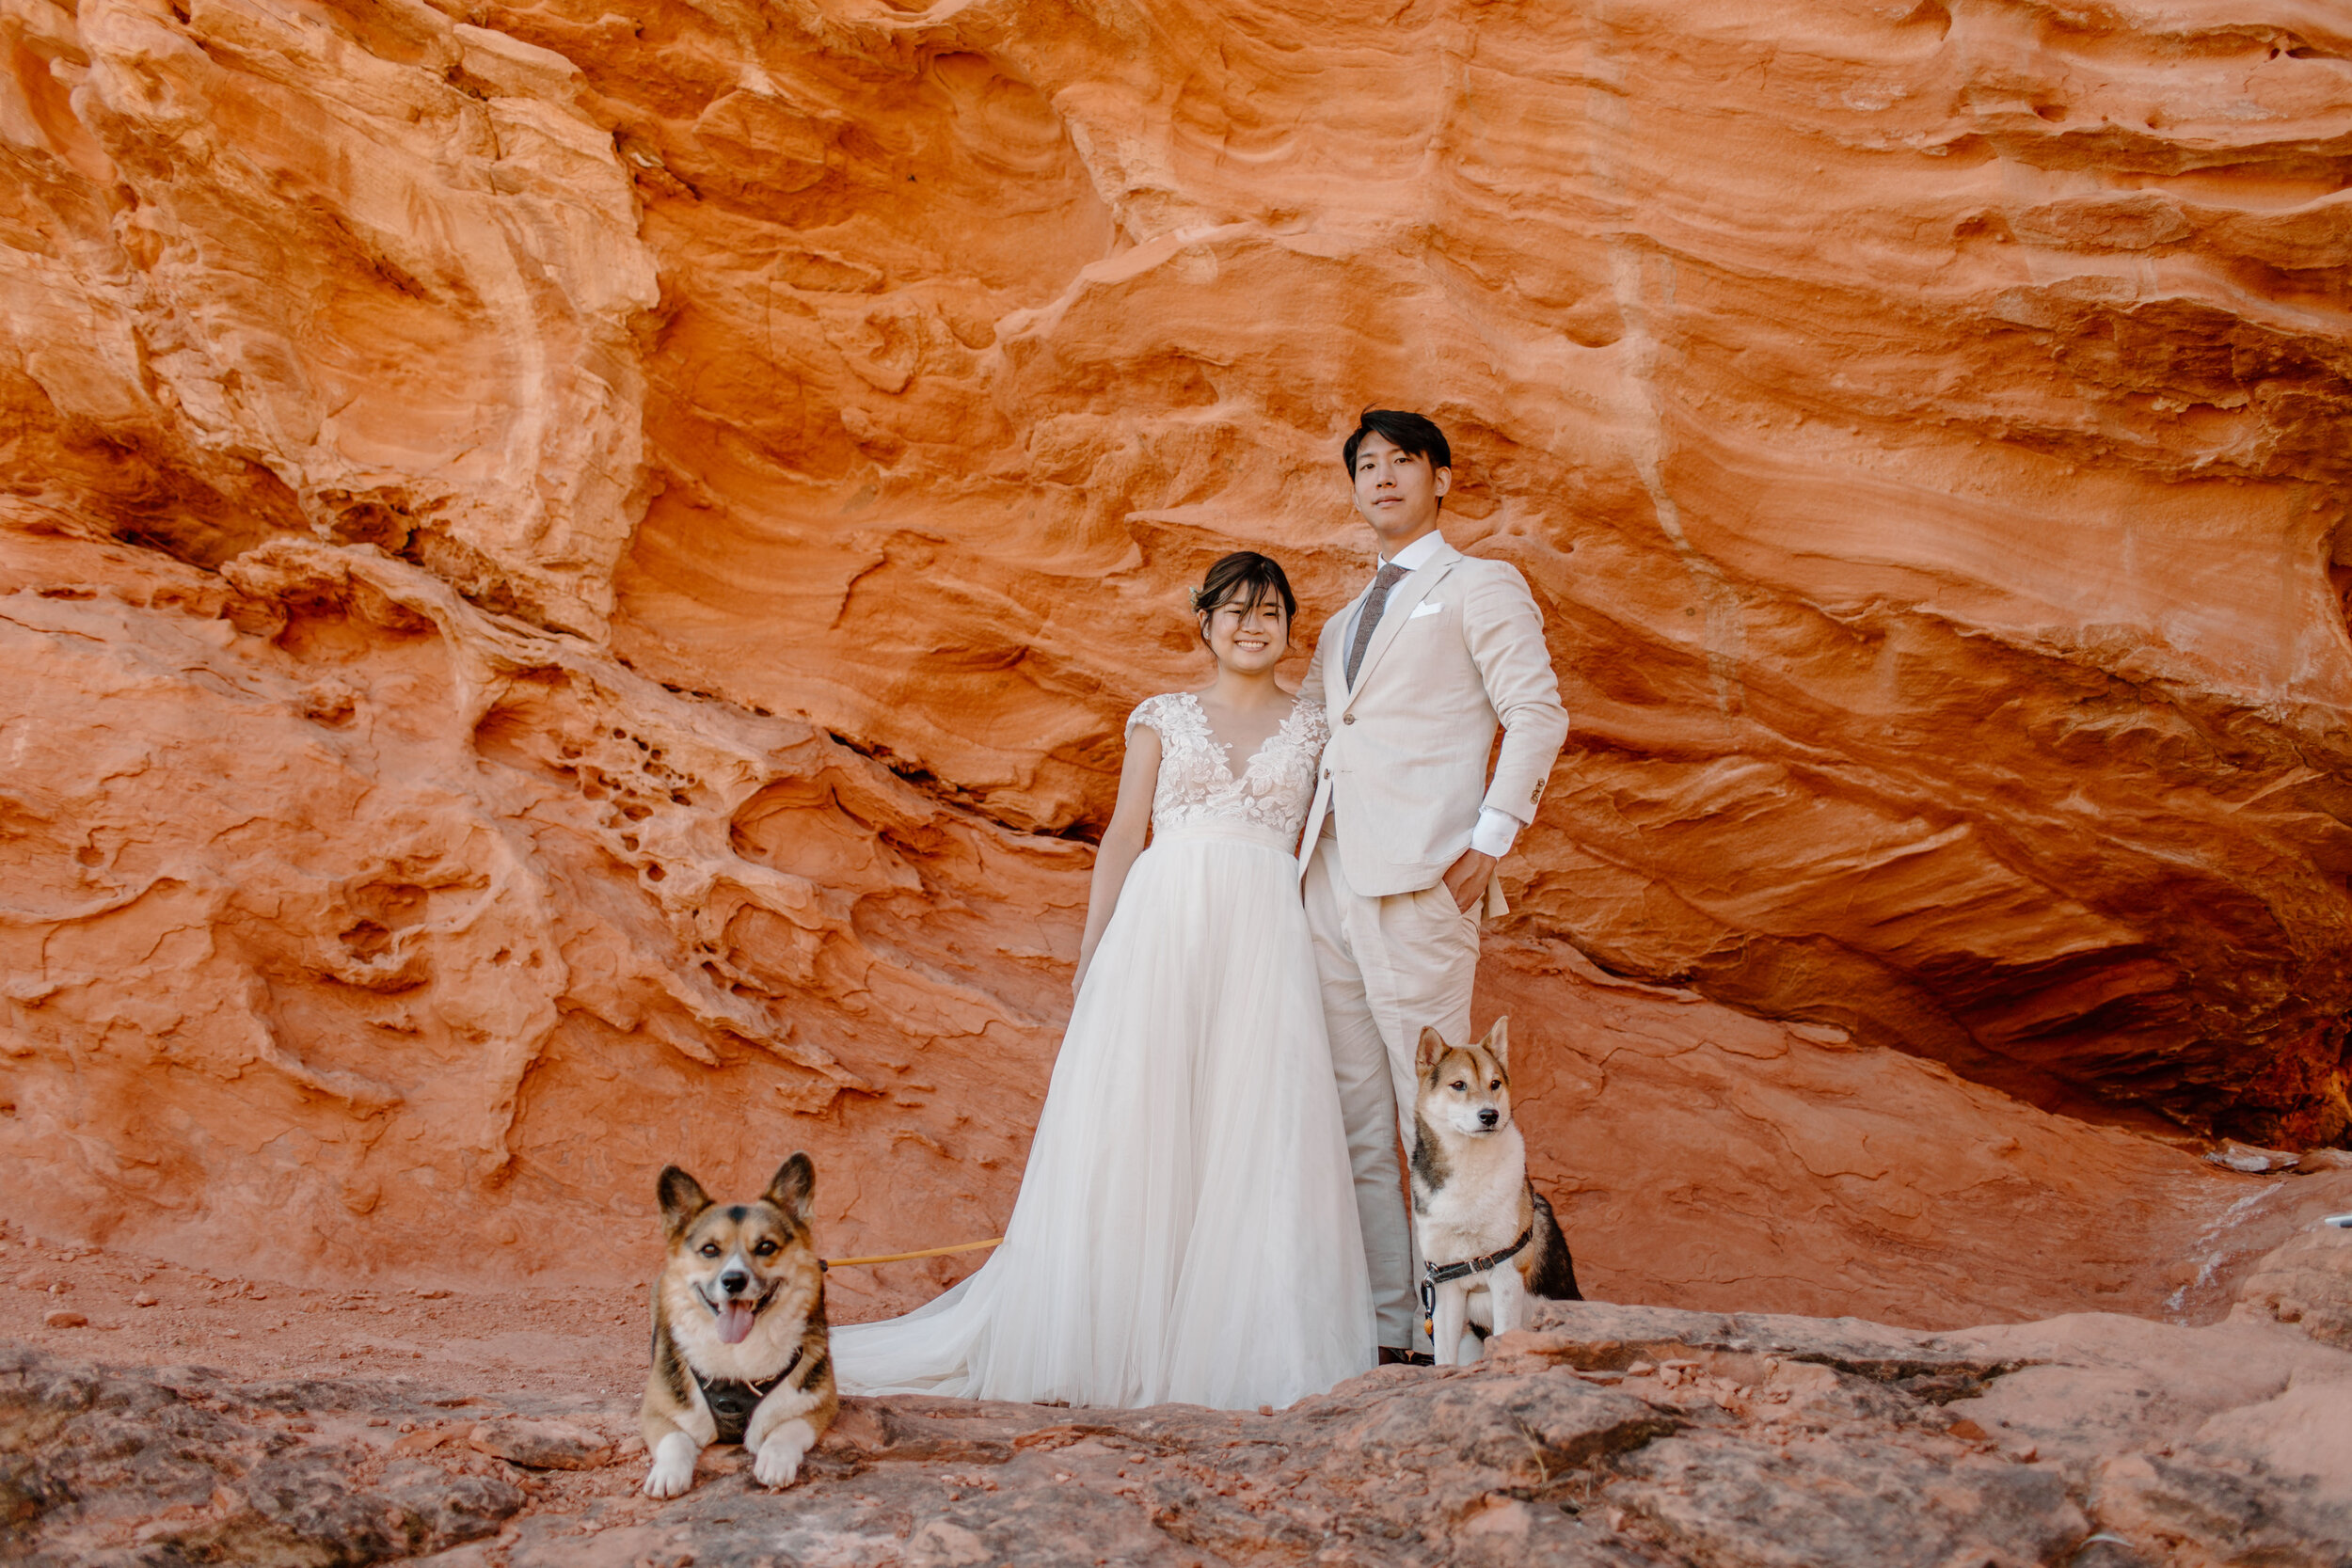  Utah elopement couple smiles at the camera with their dogs at their feet in front of a red rock wall in St. George Utah. Utah elopement photographer, Lucy B. Photography. 